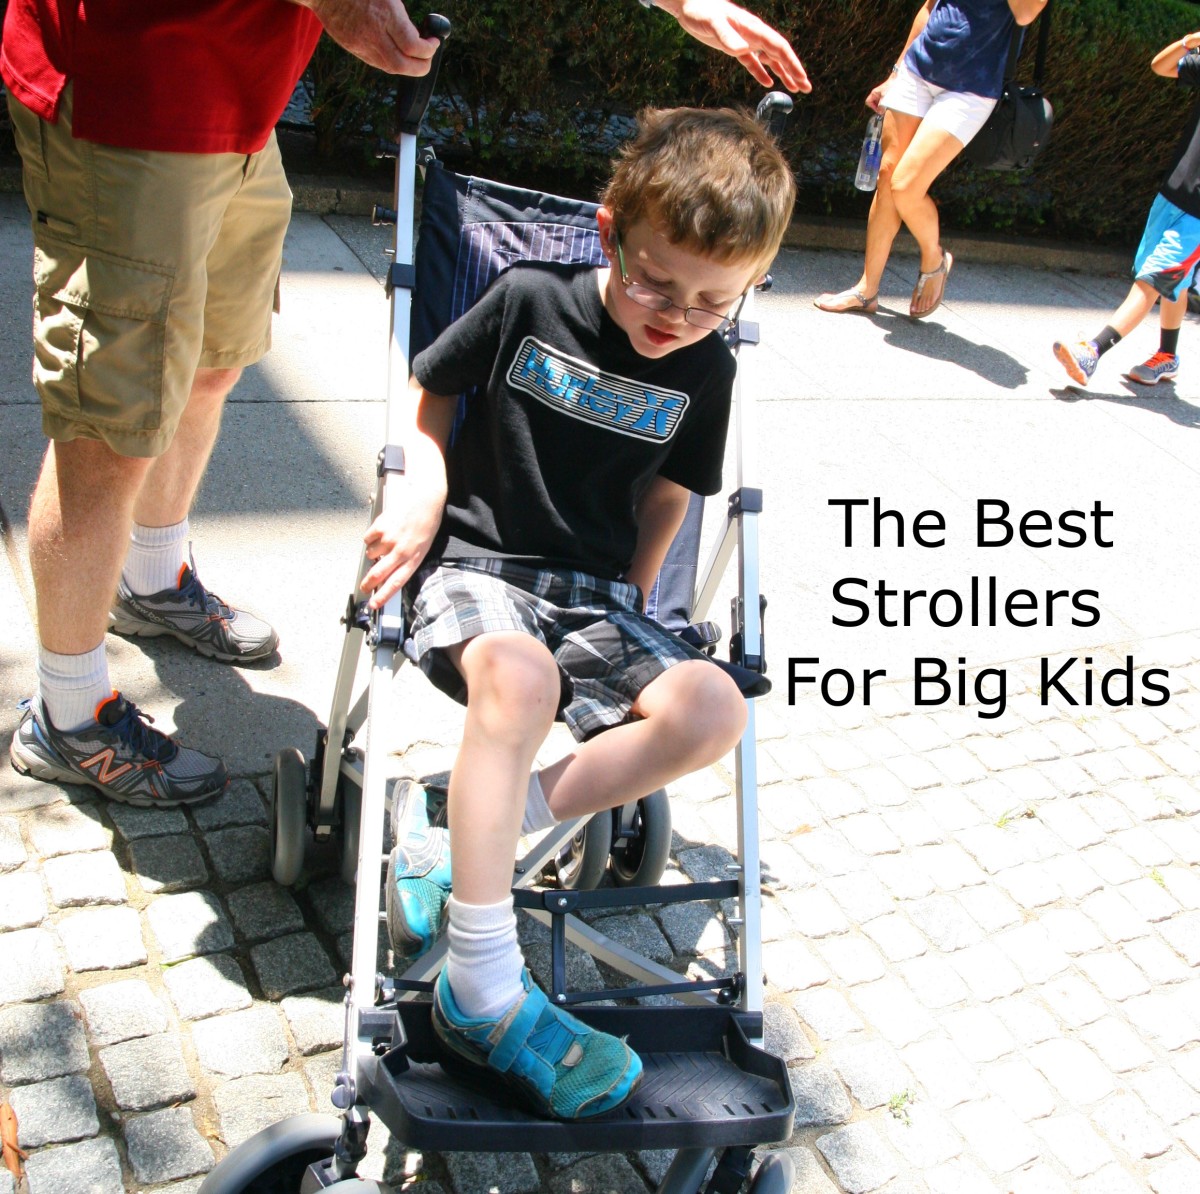 The Best Strollers for Big Kids